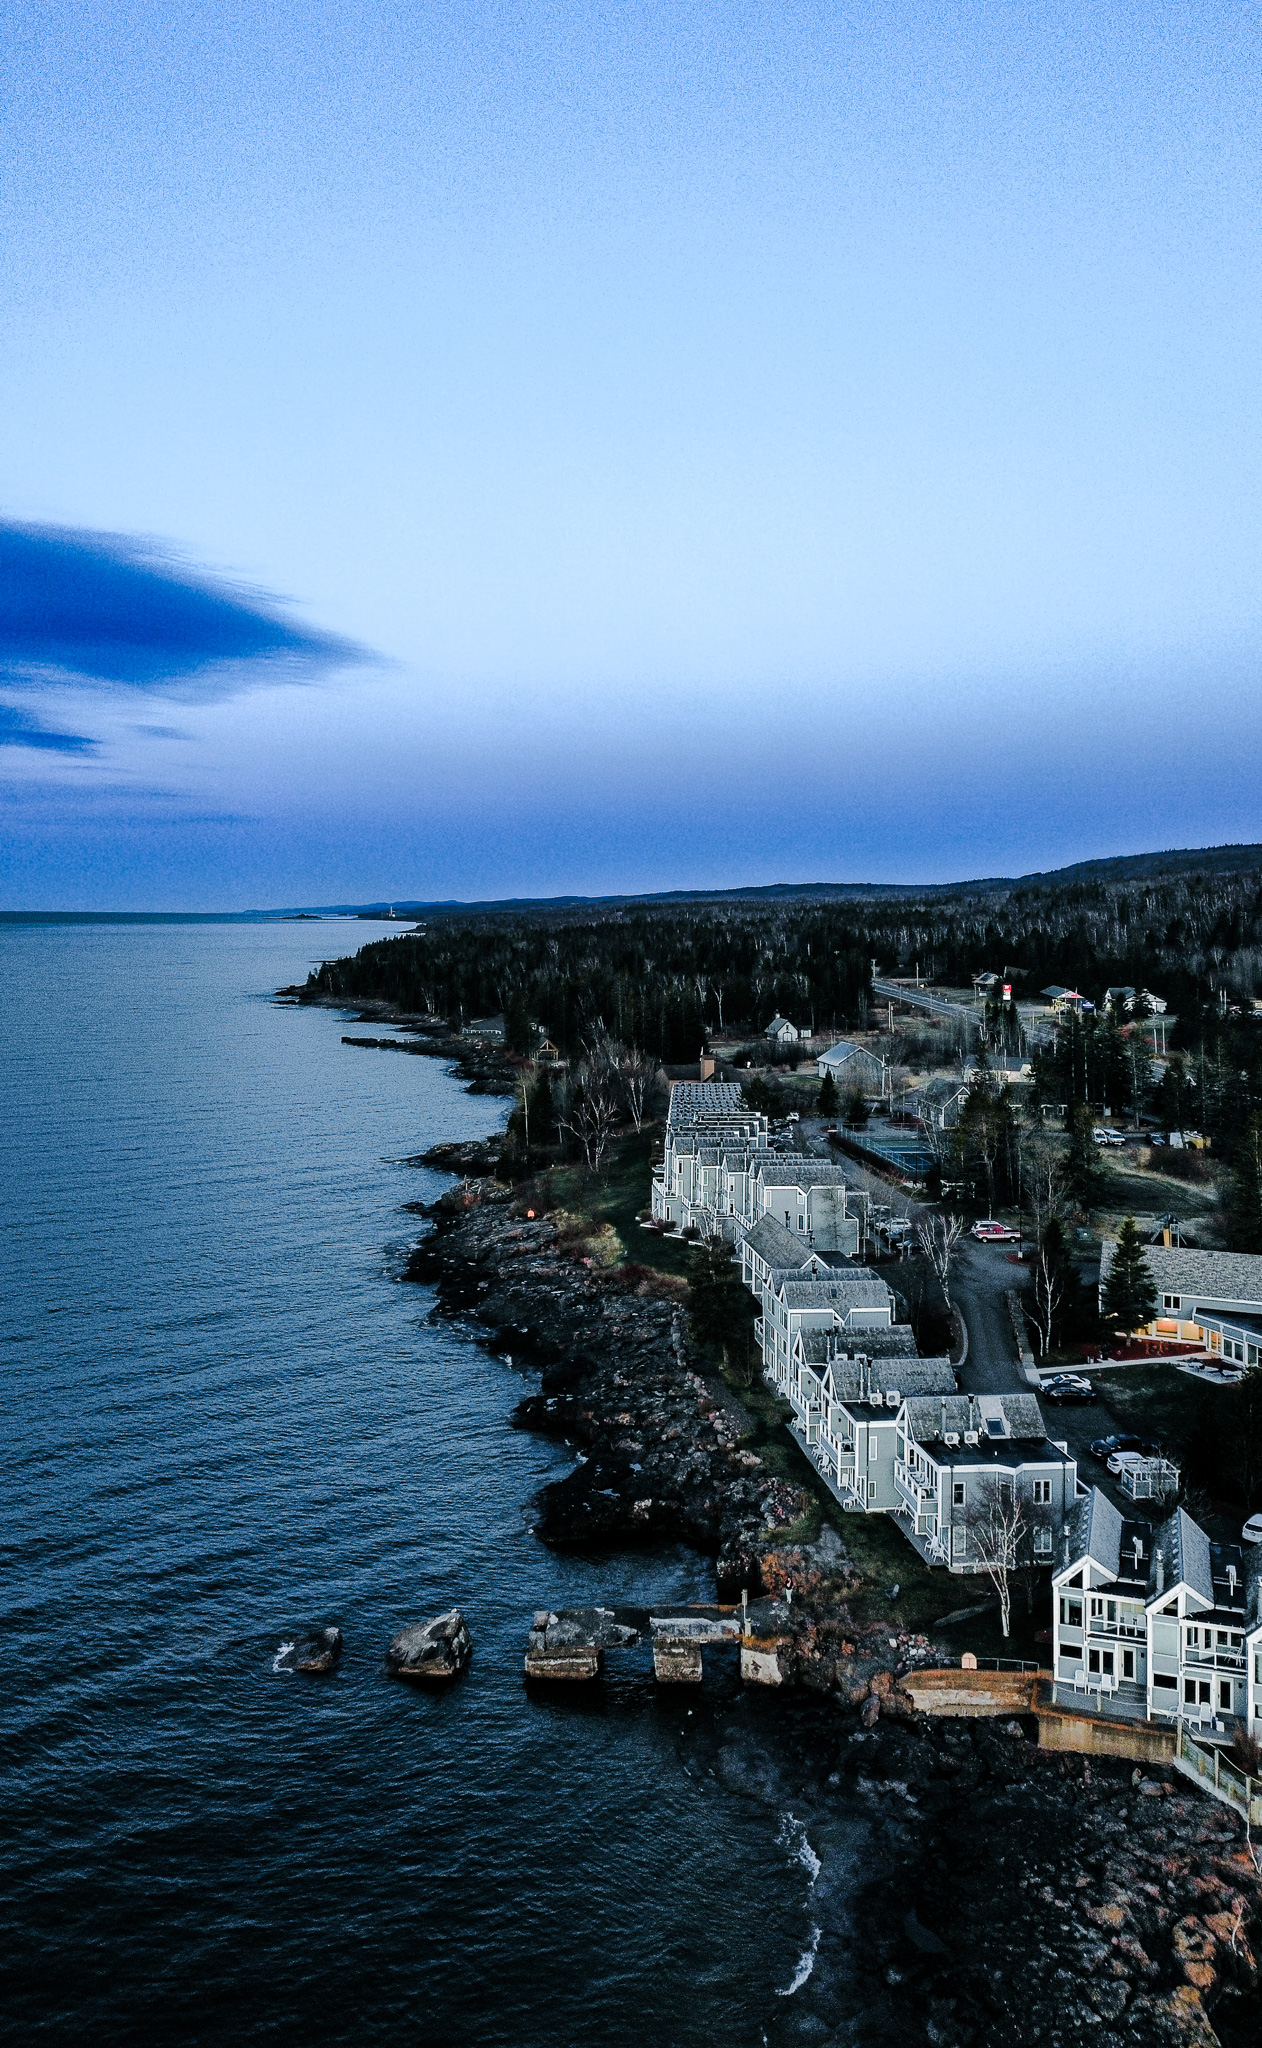 Bluefin Bay on Lake Superior: Things to Do During a North Shore Weekend Trip